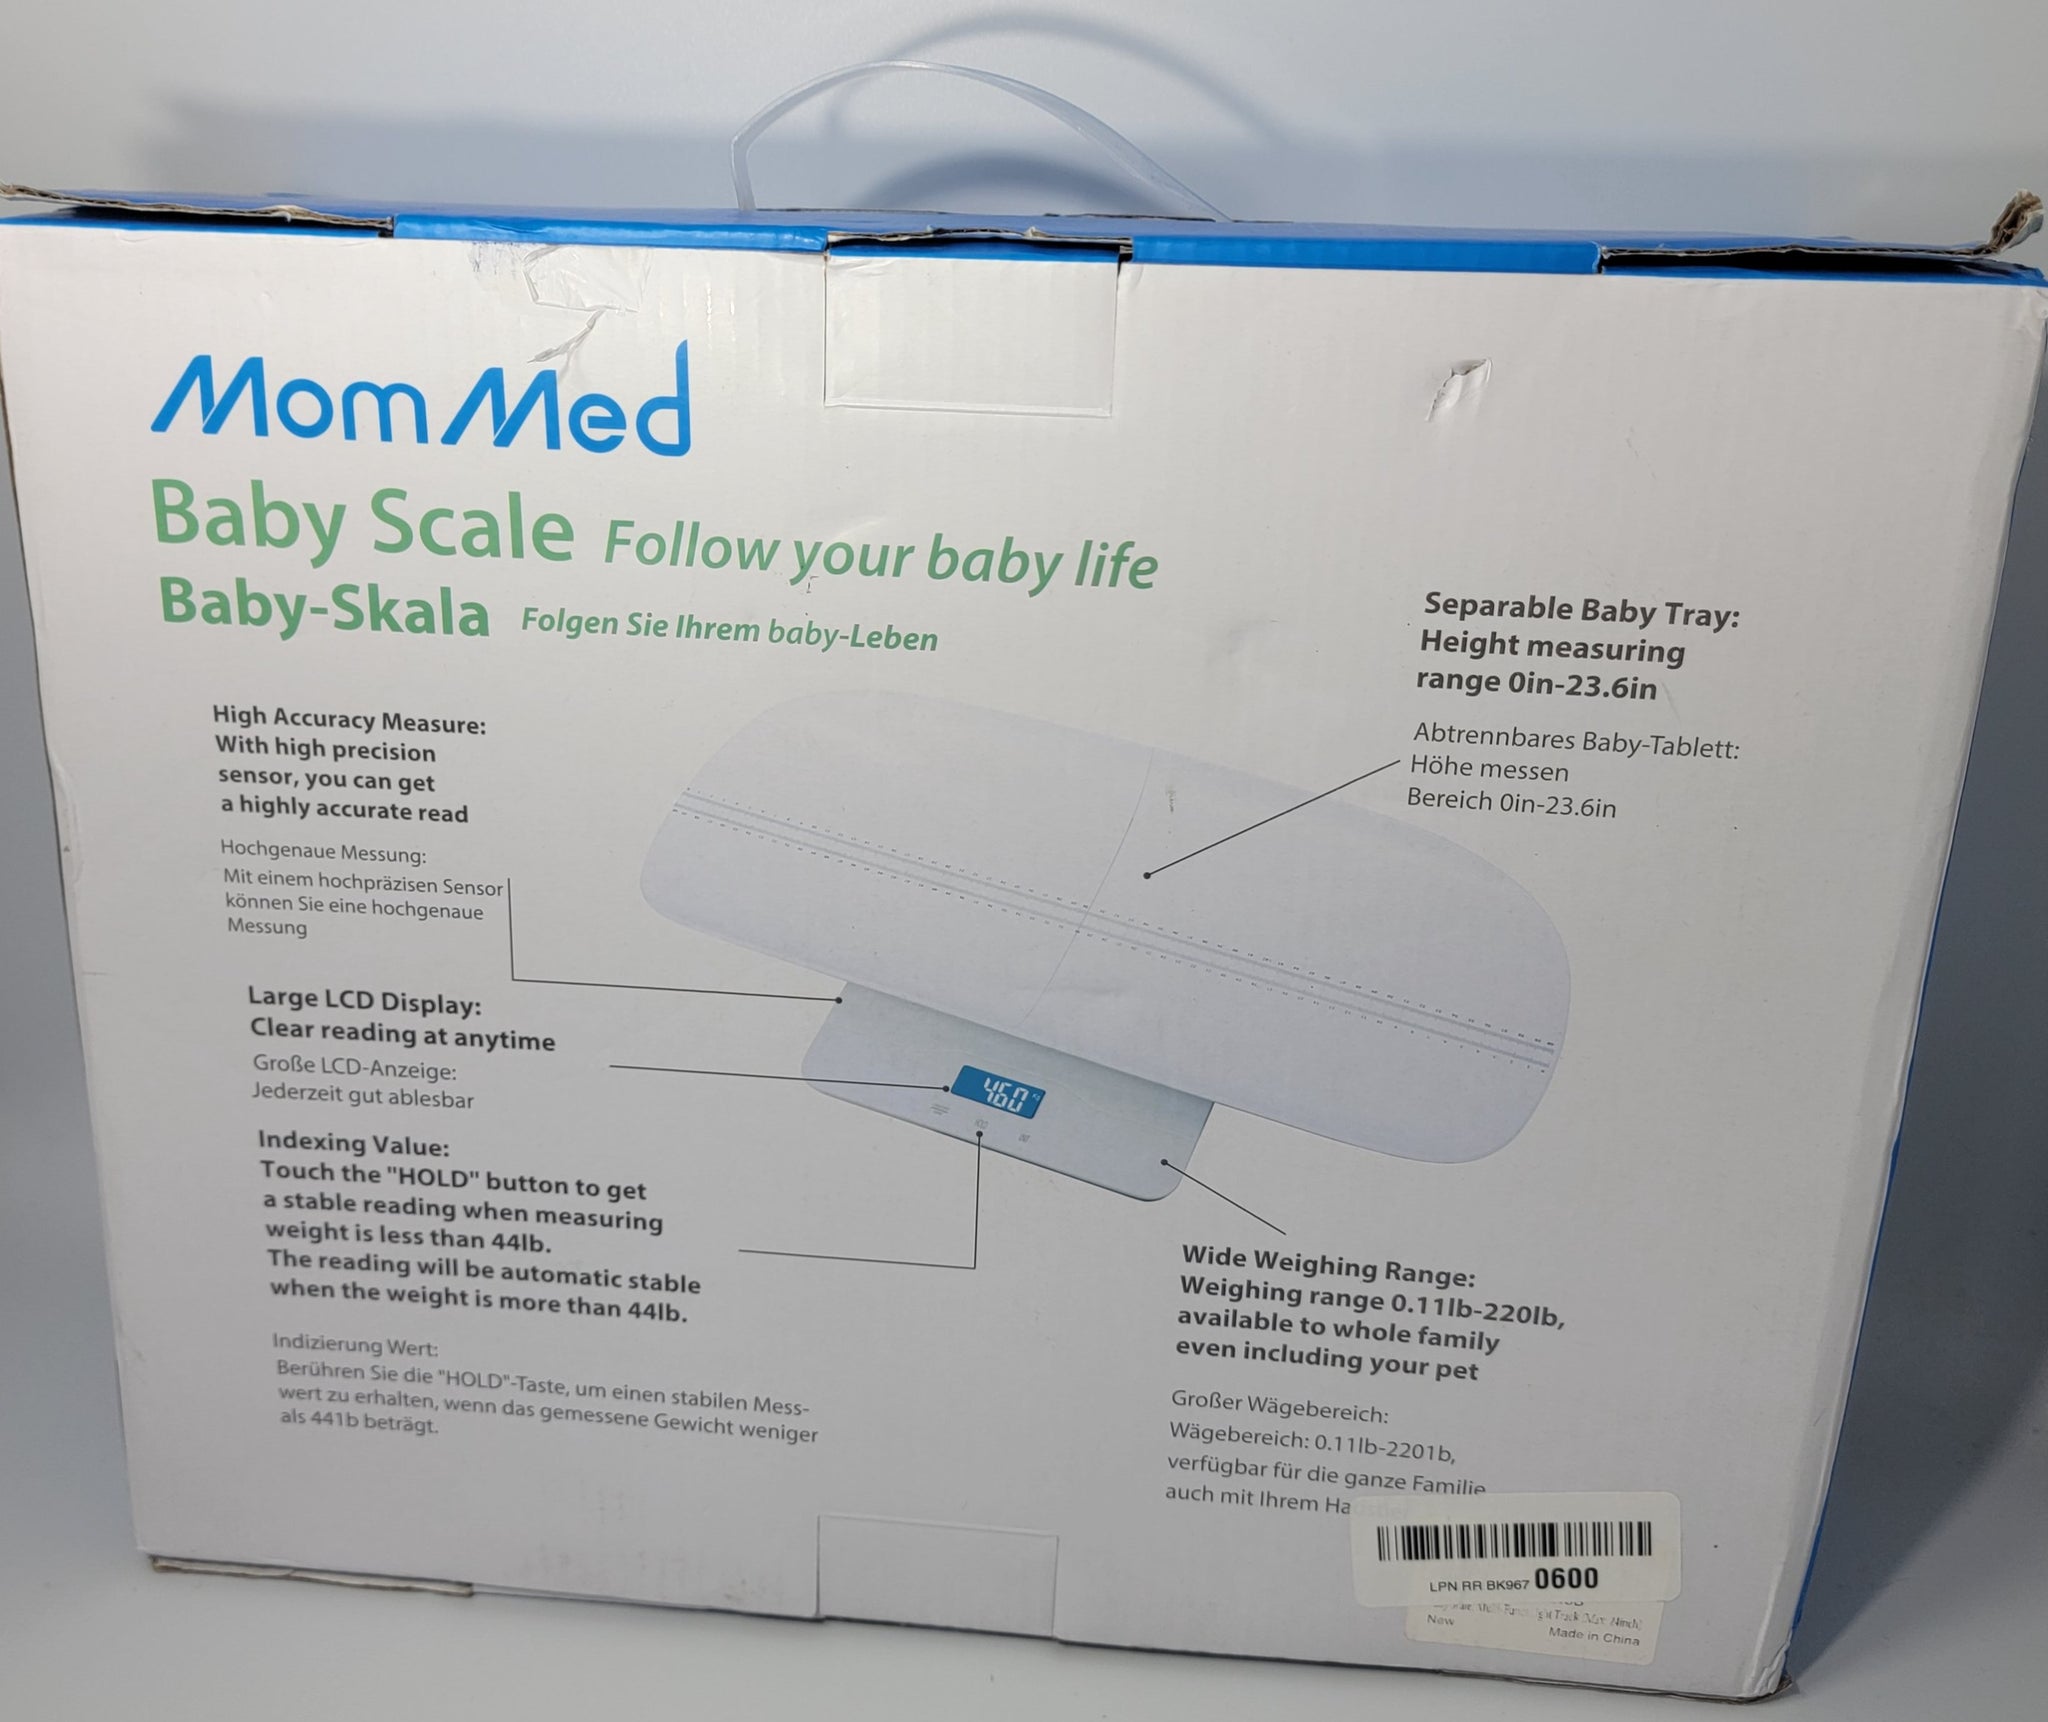 Digital Baby Scale with Hold Function, Pet Scale, Muti-Function